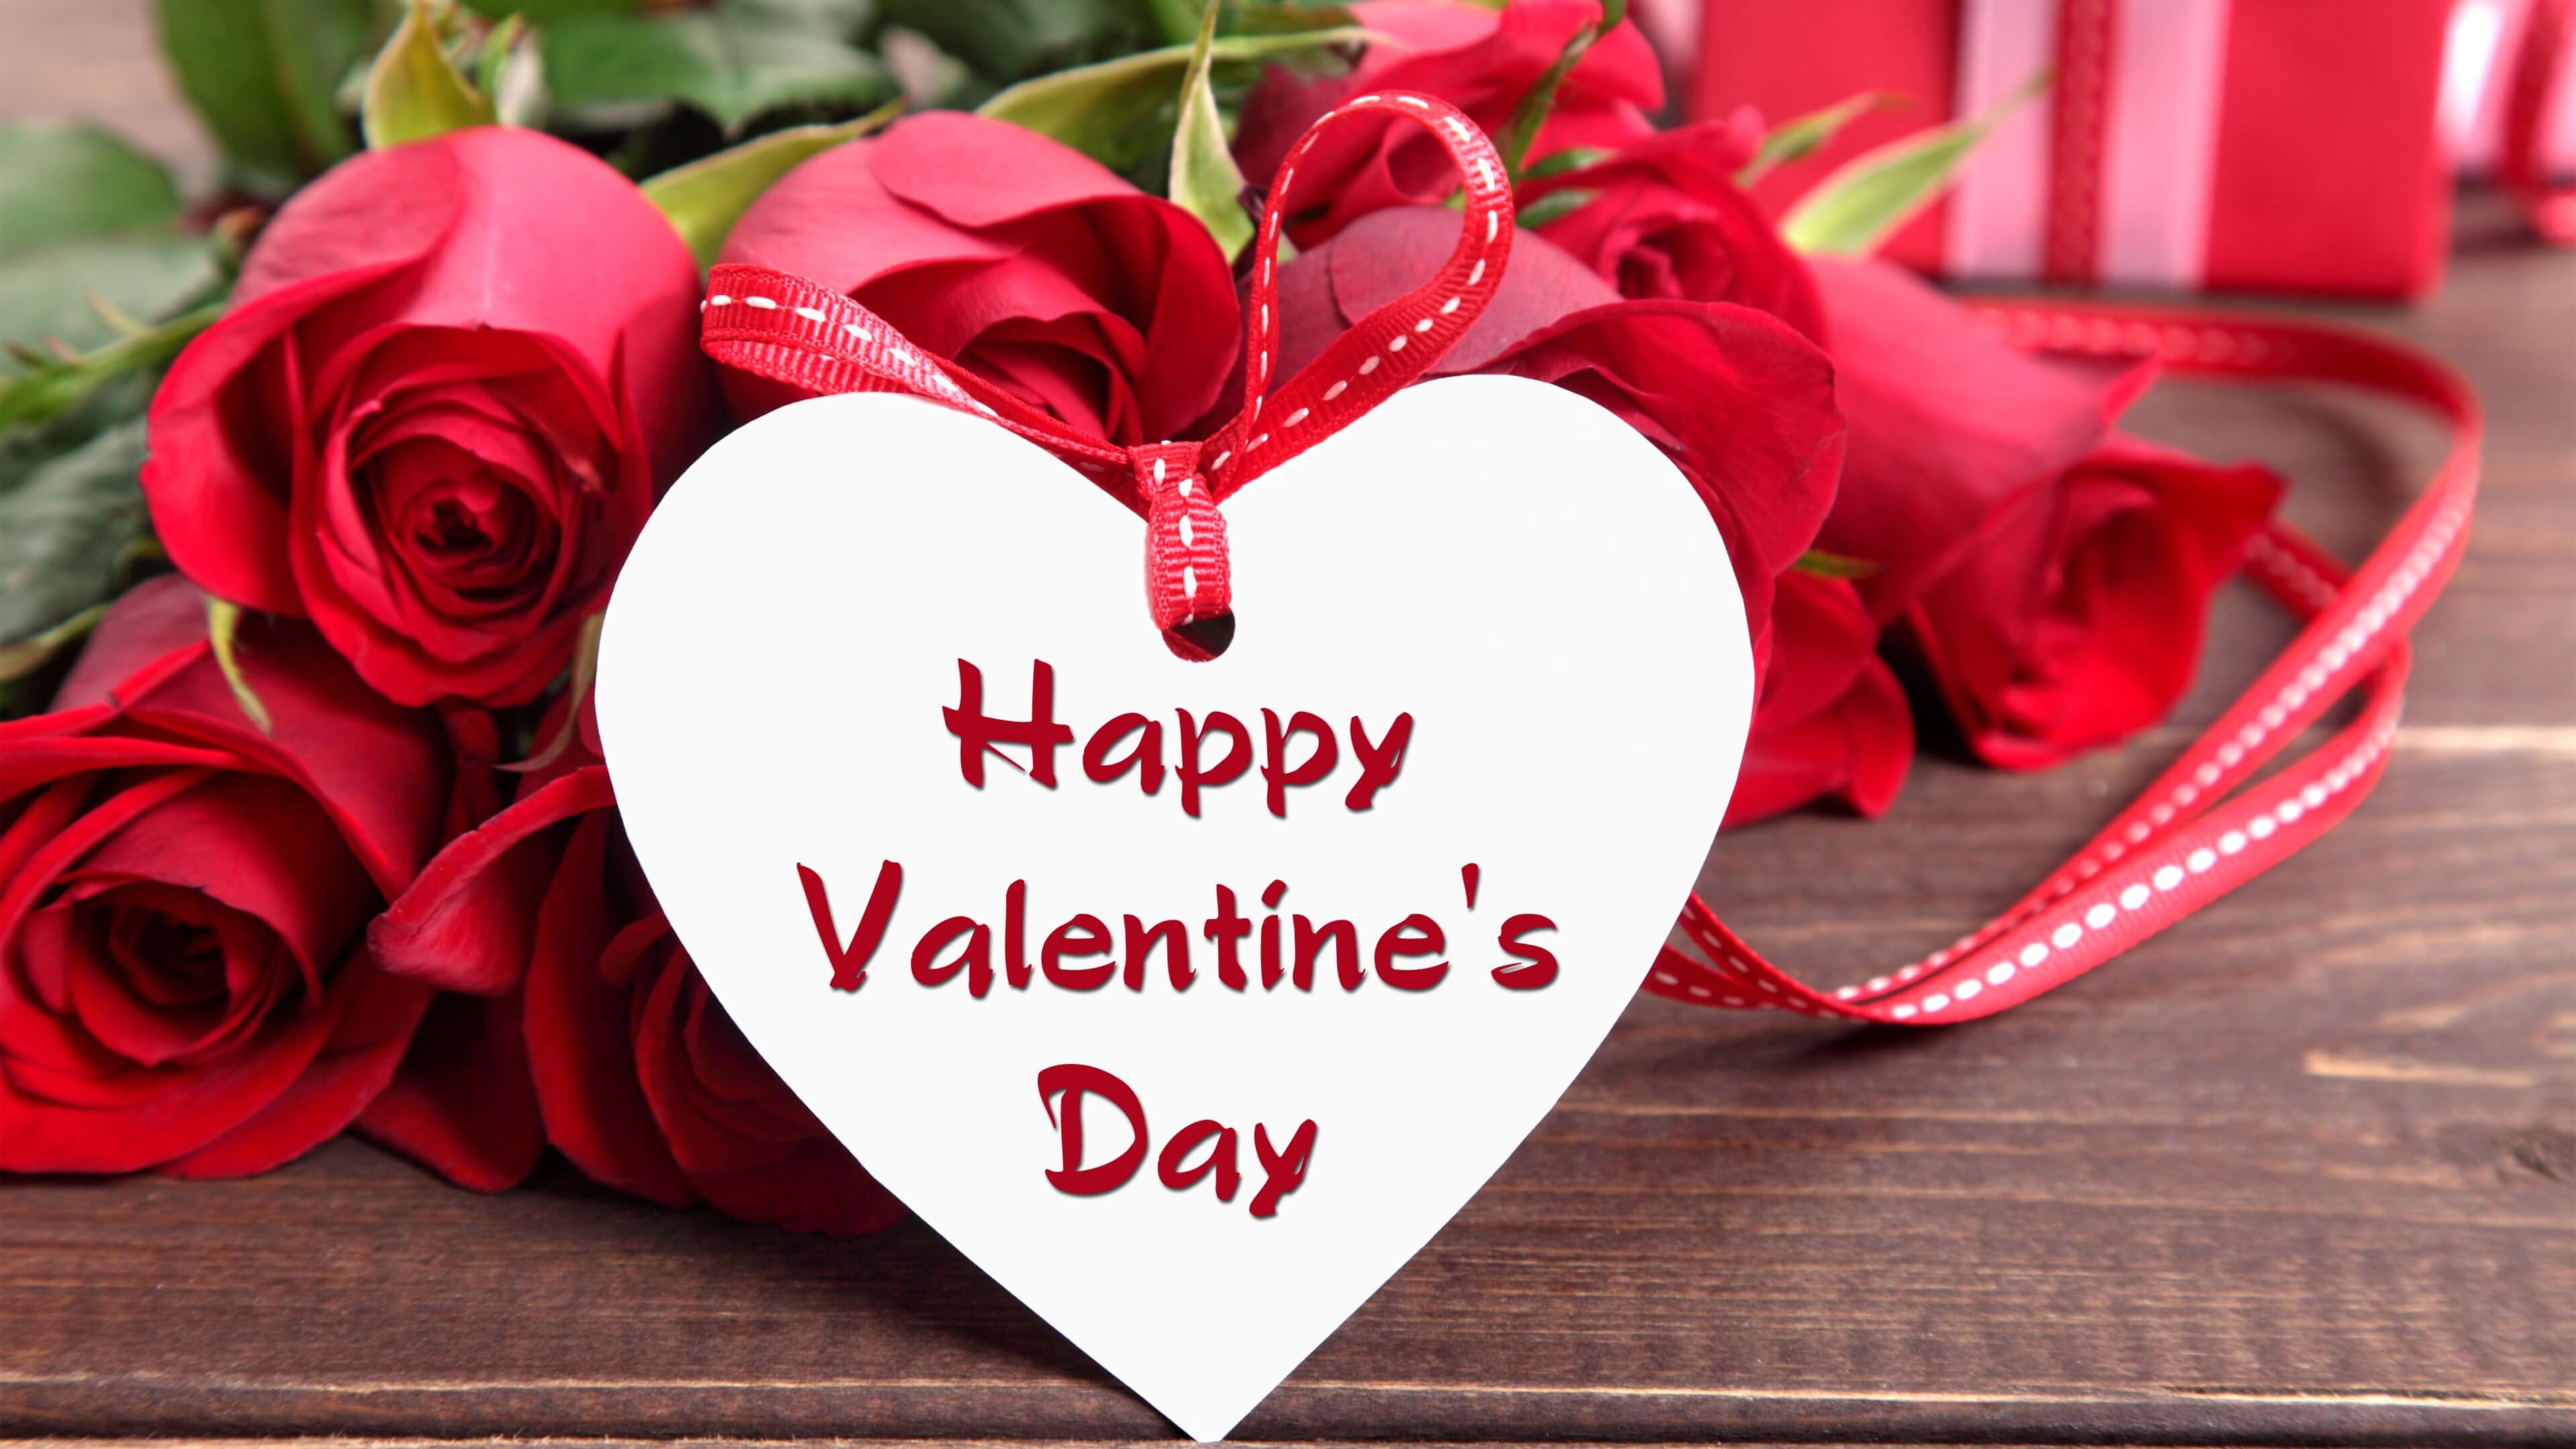 Happy Valentines Day Dp for Facebook , Twitter& Whatsapp